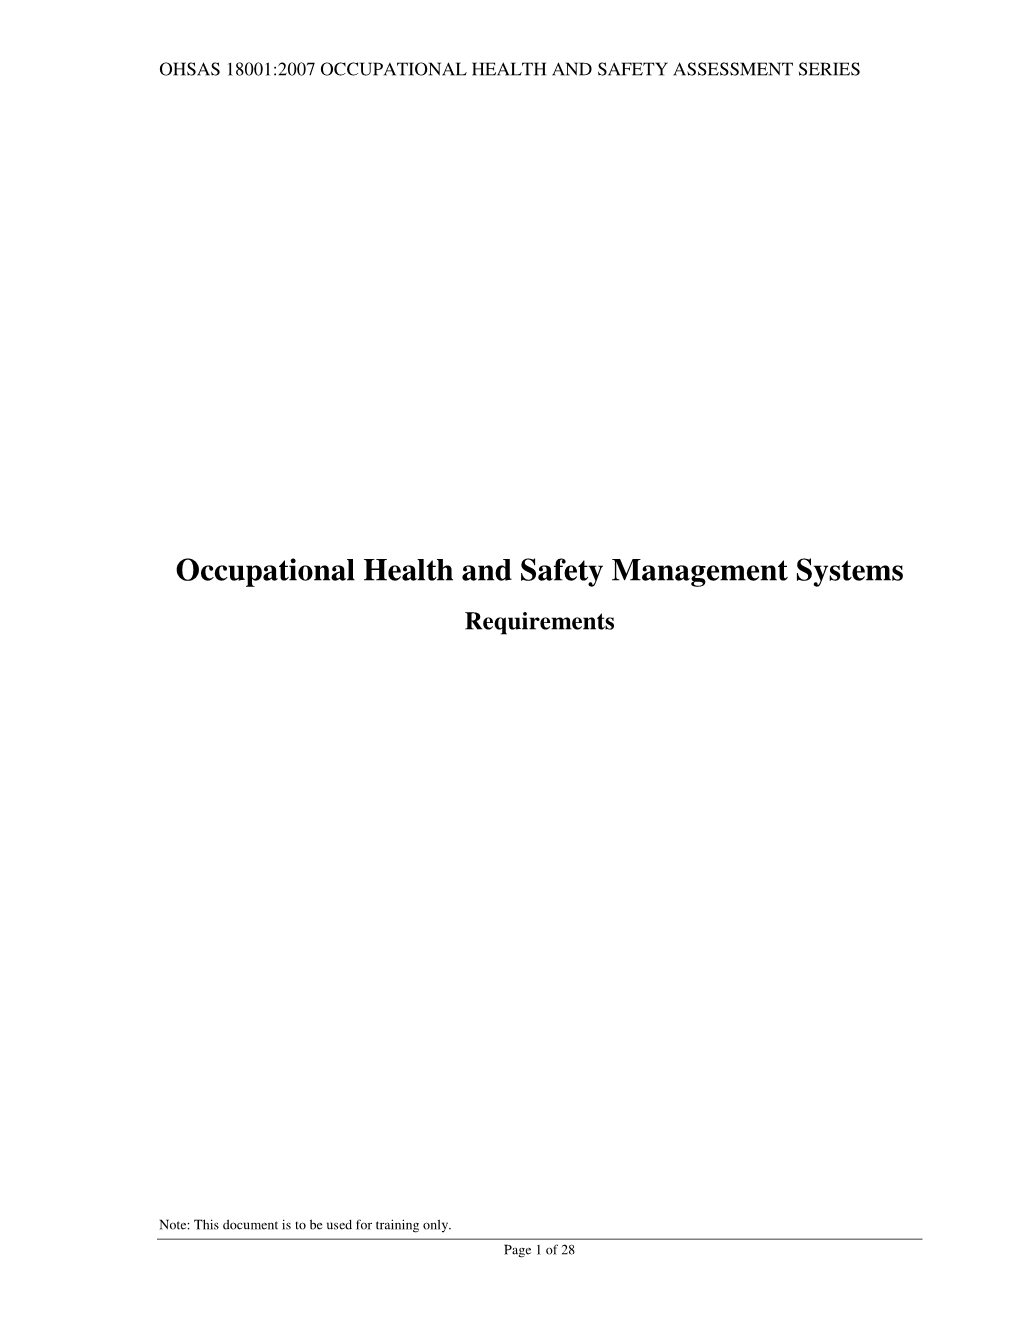 Ohsas 18001:2007 Occupational Health and Safety Assessment Series